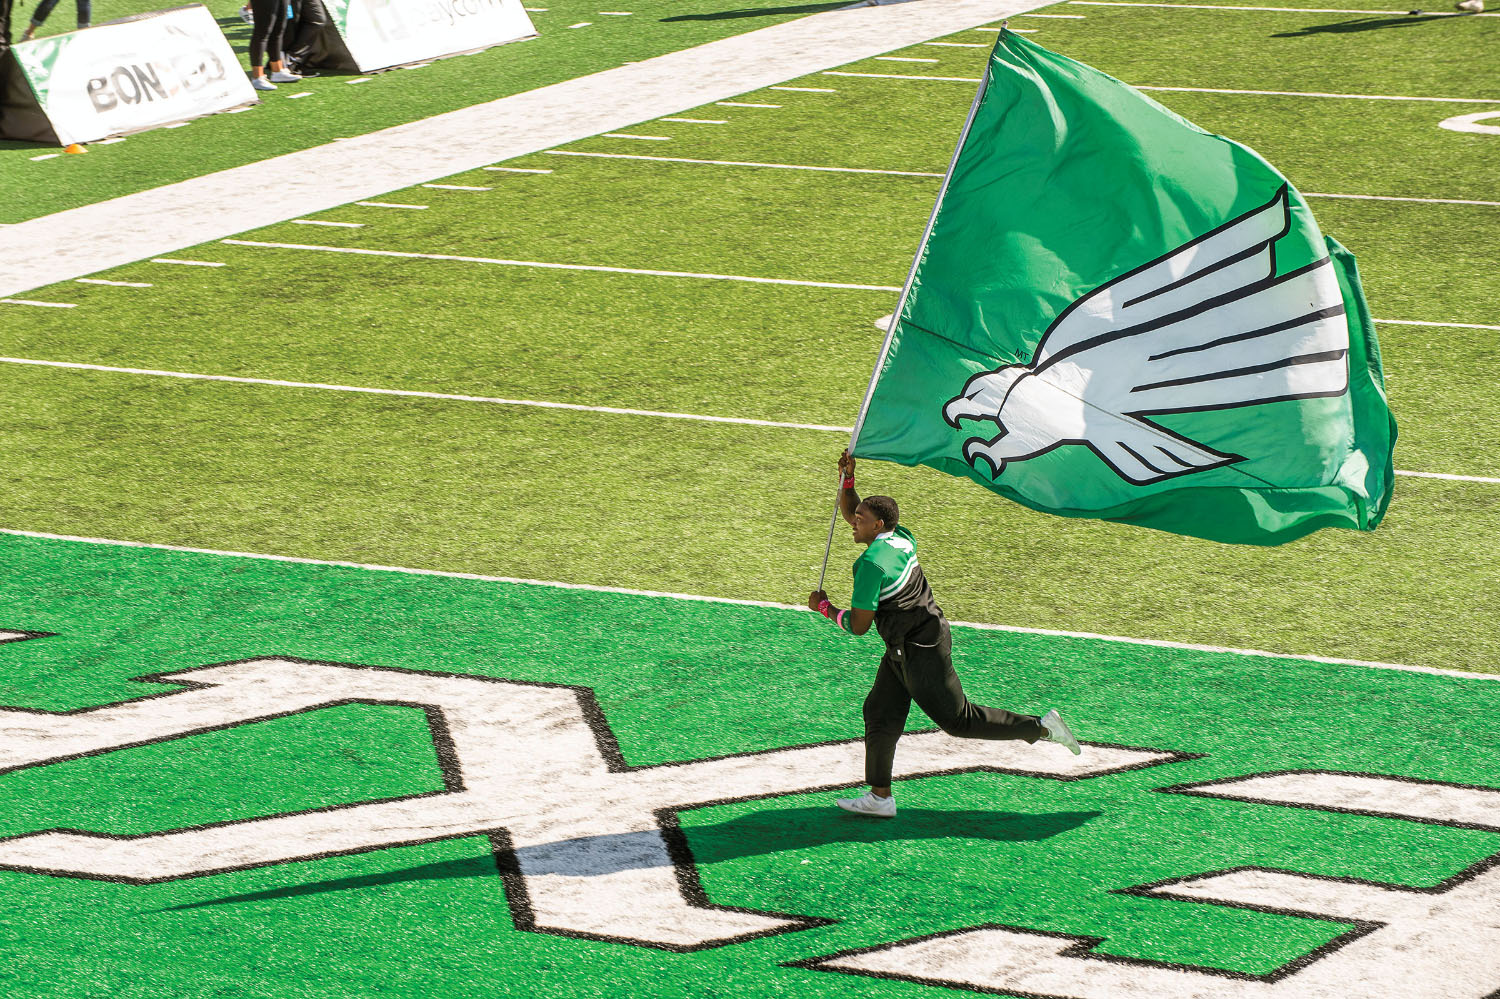 A man carries a large flag displaying the University of North Texas' logo and signature green color